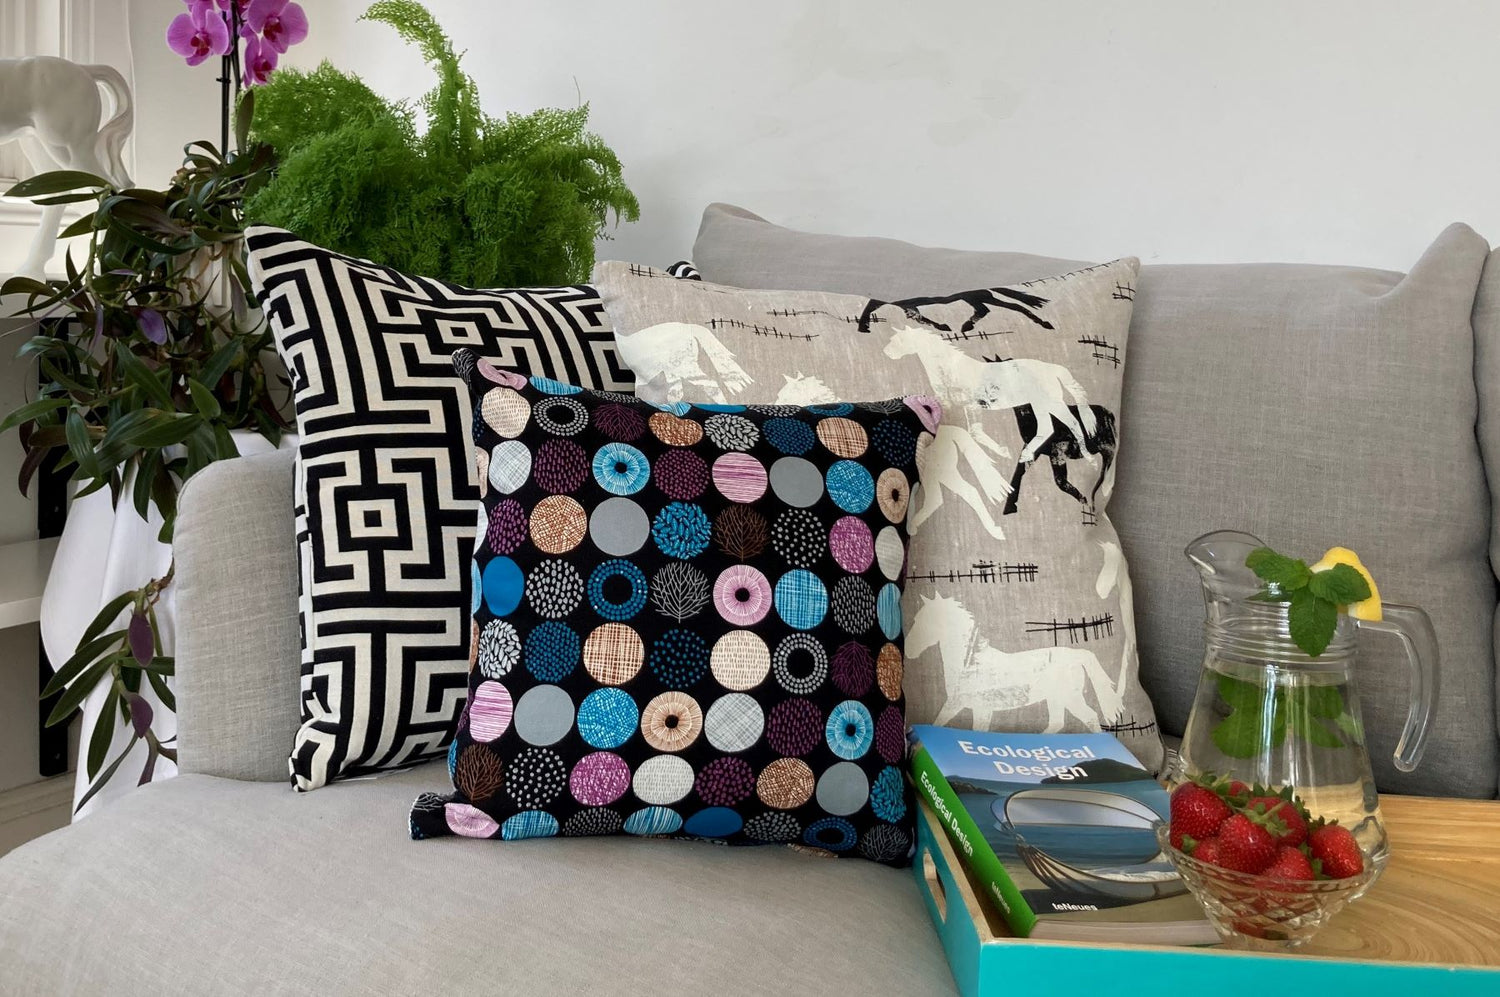 photo of beautifully styled cushions in blacks, whites with pops of colour